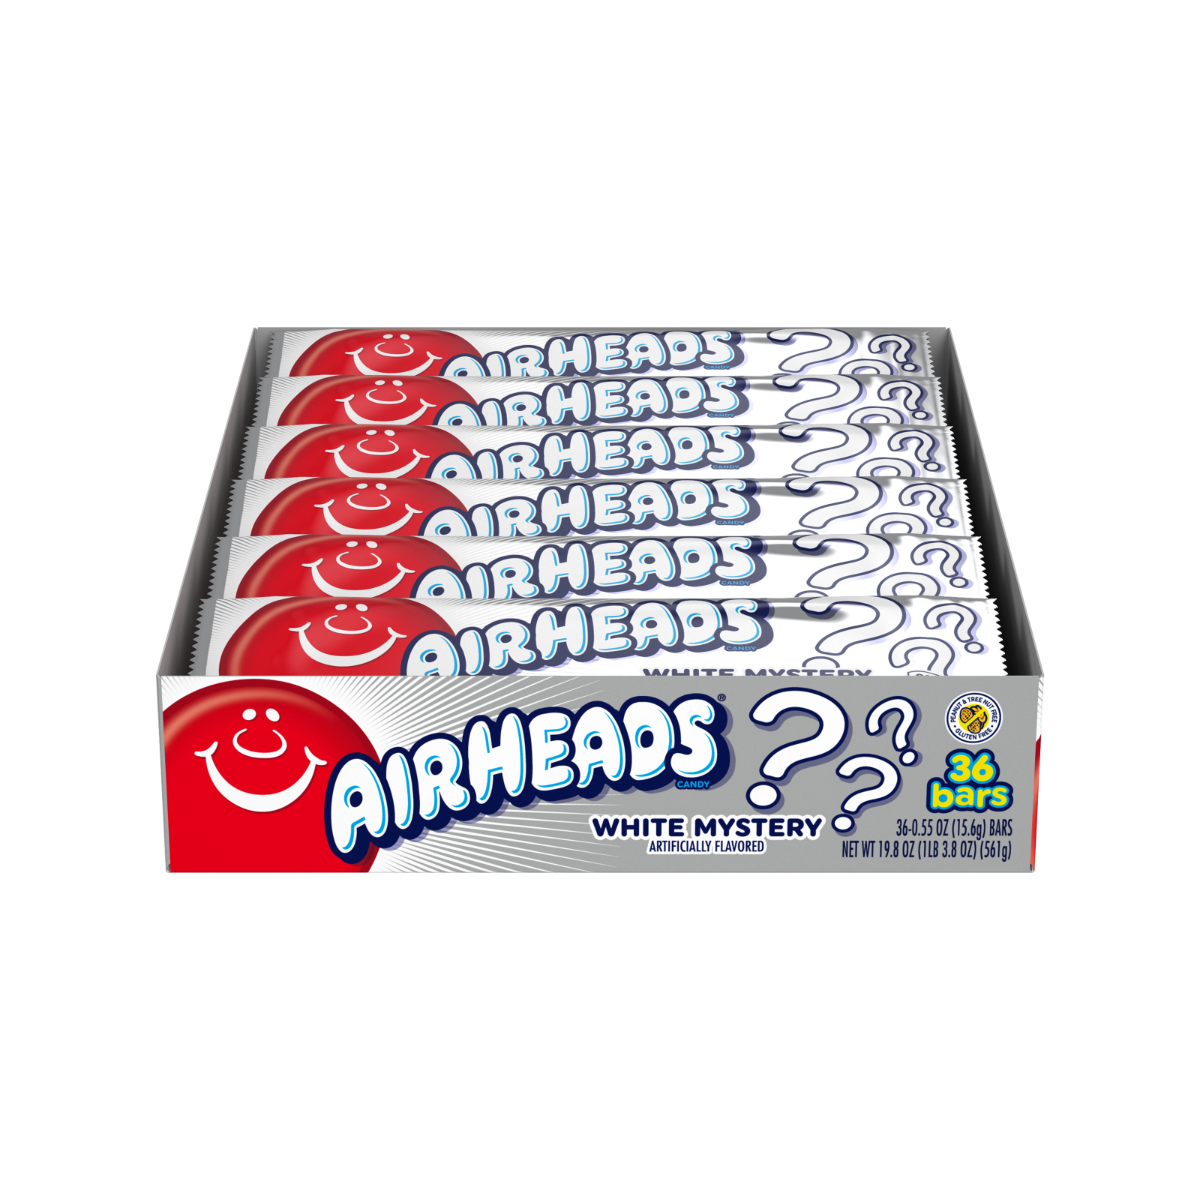 AIRHEADS WHITE MYSTERY TAFFY